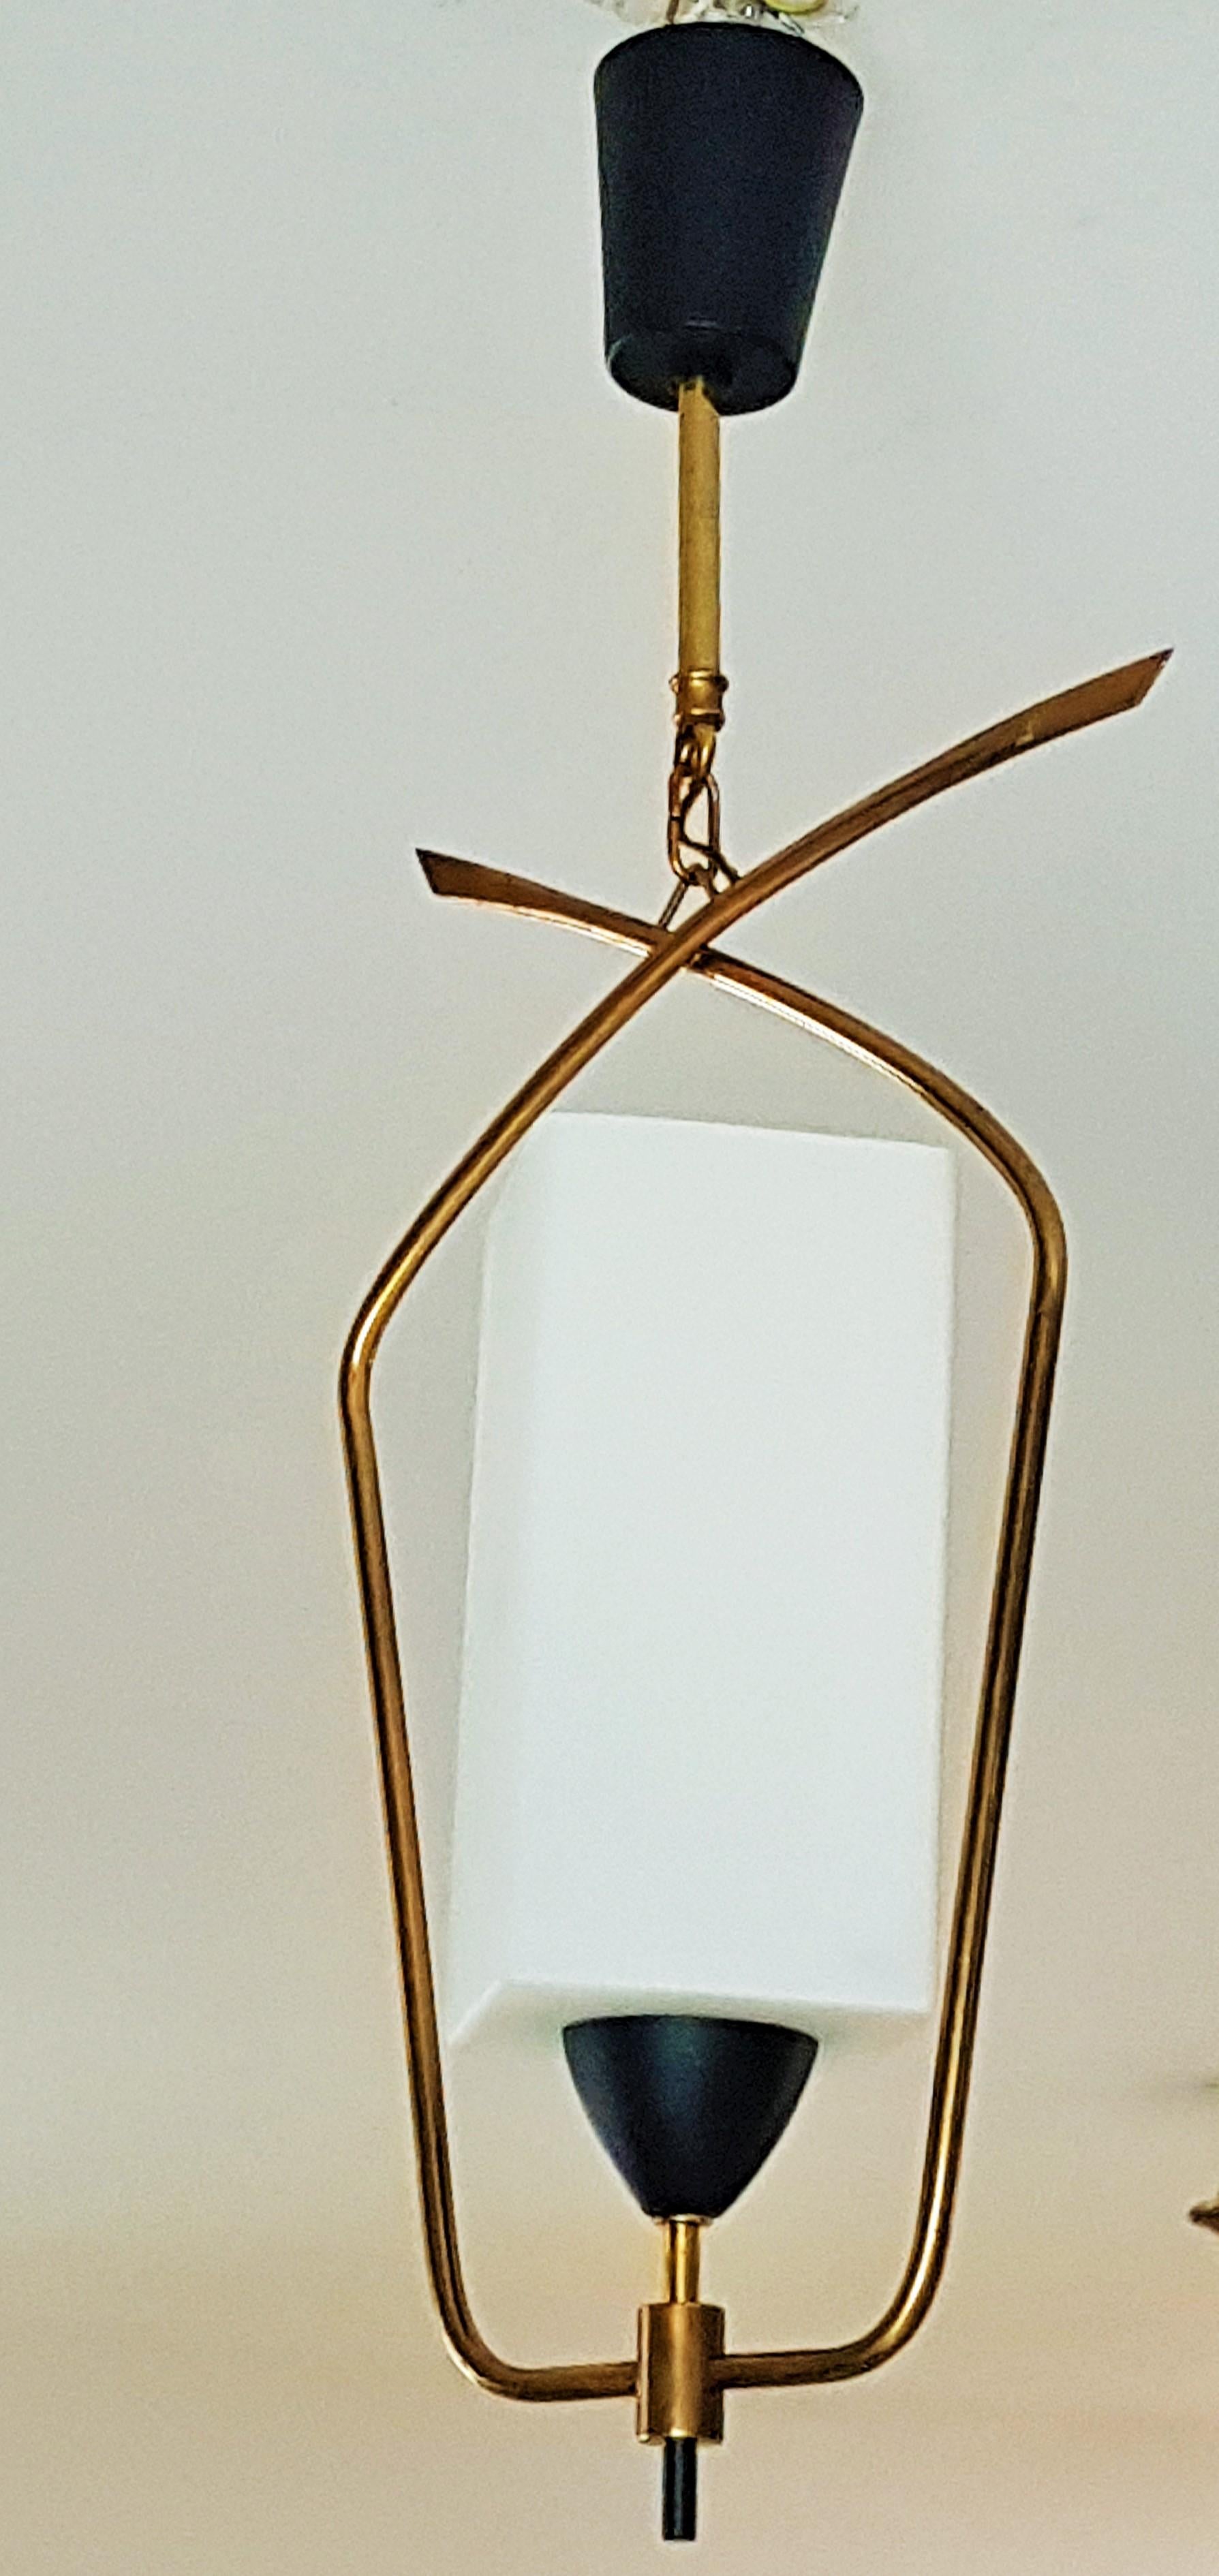 Midcentury Brass and Glass Pendant Lantern by Arlus Lunel, France, 1950 For Sale 10